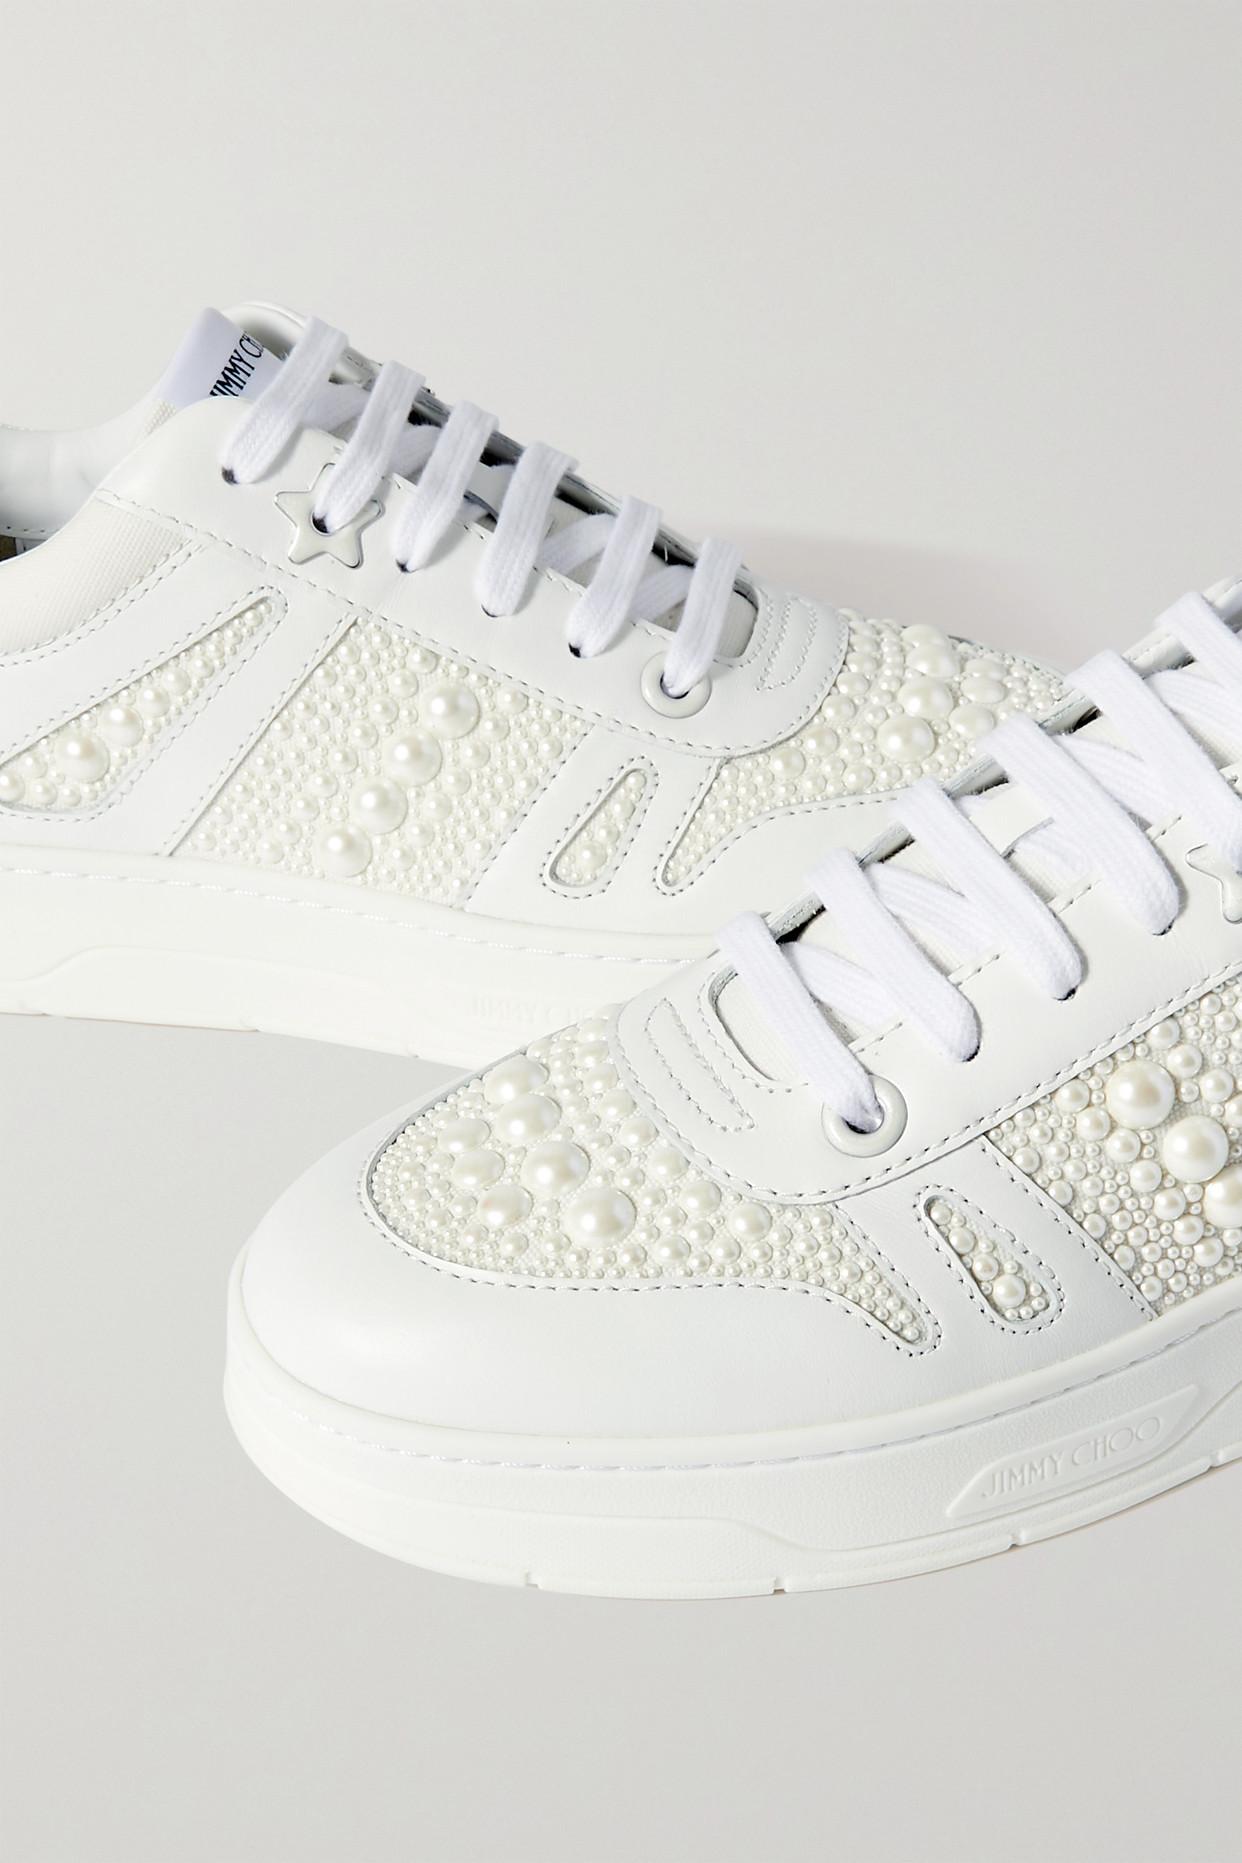 Jimmy Choo Hawaii Faux Pearl-embellished Leather Sneakers in White | Lyst